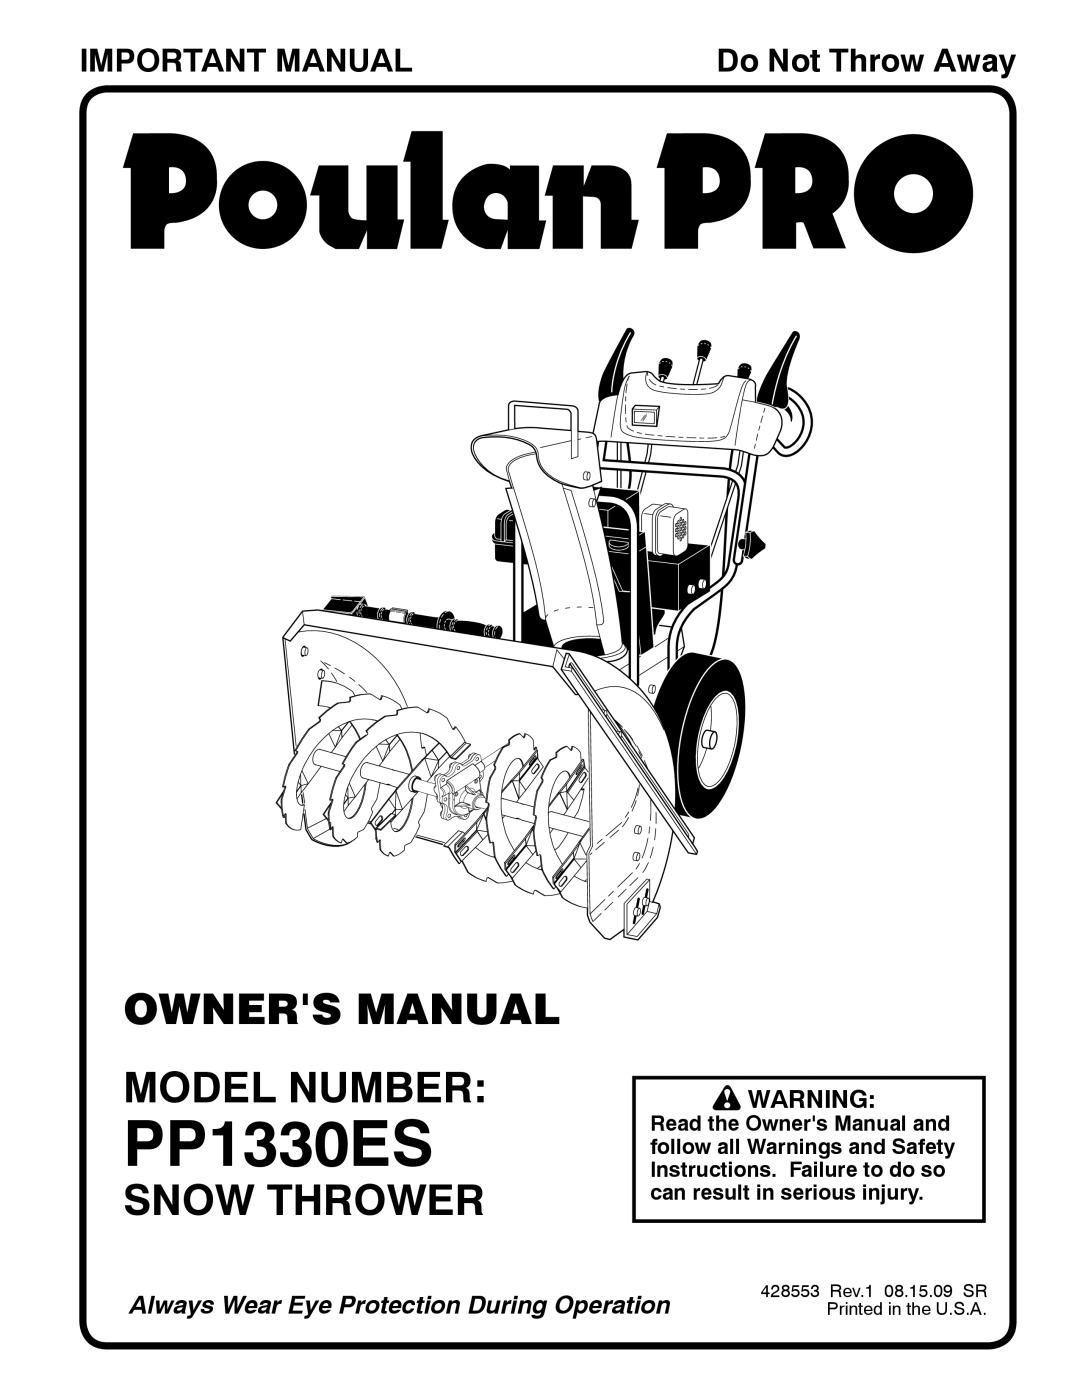 Poulan 96192003200 owner manual Owners Manual Model Number, Snow Thrower, Important Manual, PP1330ES, Do Not Throw Away 